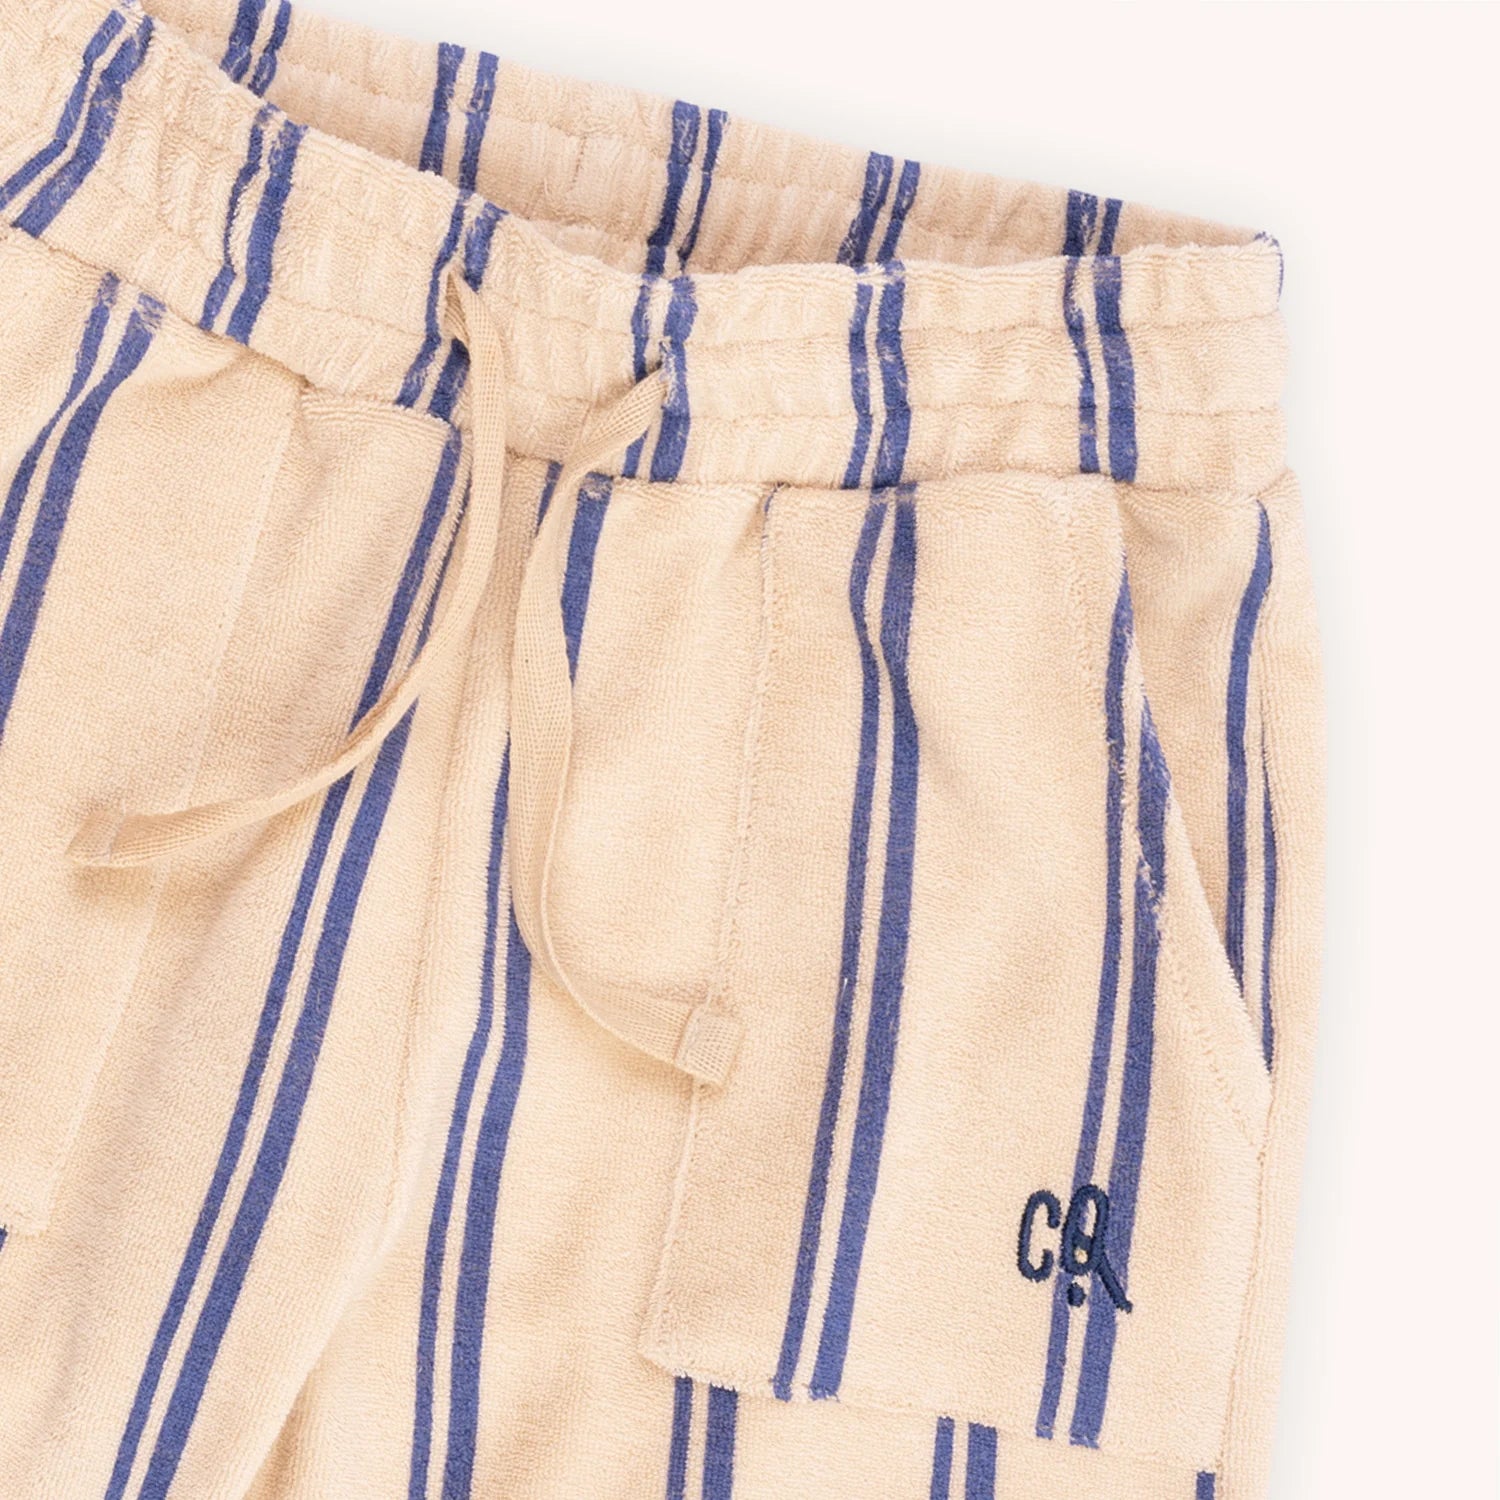 Kids' shorts from organic terry towel light fabric from CarlijnQ are designed in a loose fit with two pockets and a drawstring. The best kids' shorts for comfort and style. The breathable and stylish organic cotton terry shorts are with blue stripes. MiliMilu offers sustainable kids and teen clothing in Hong Kong.